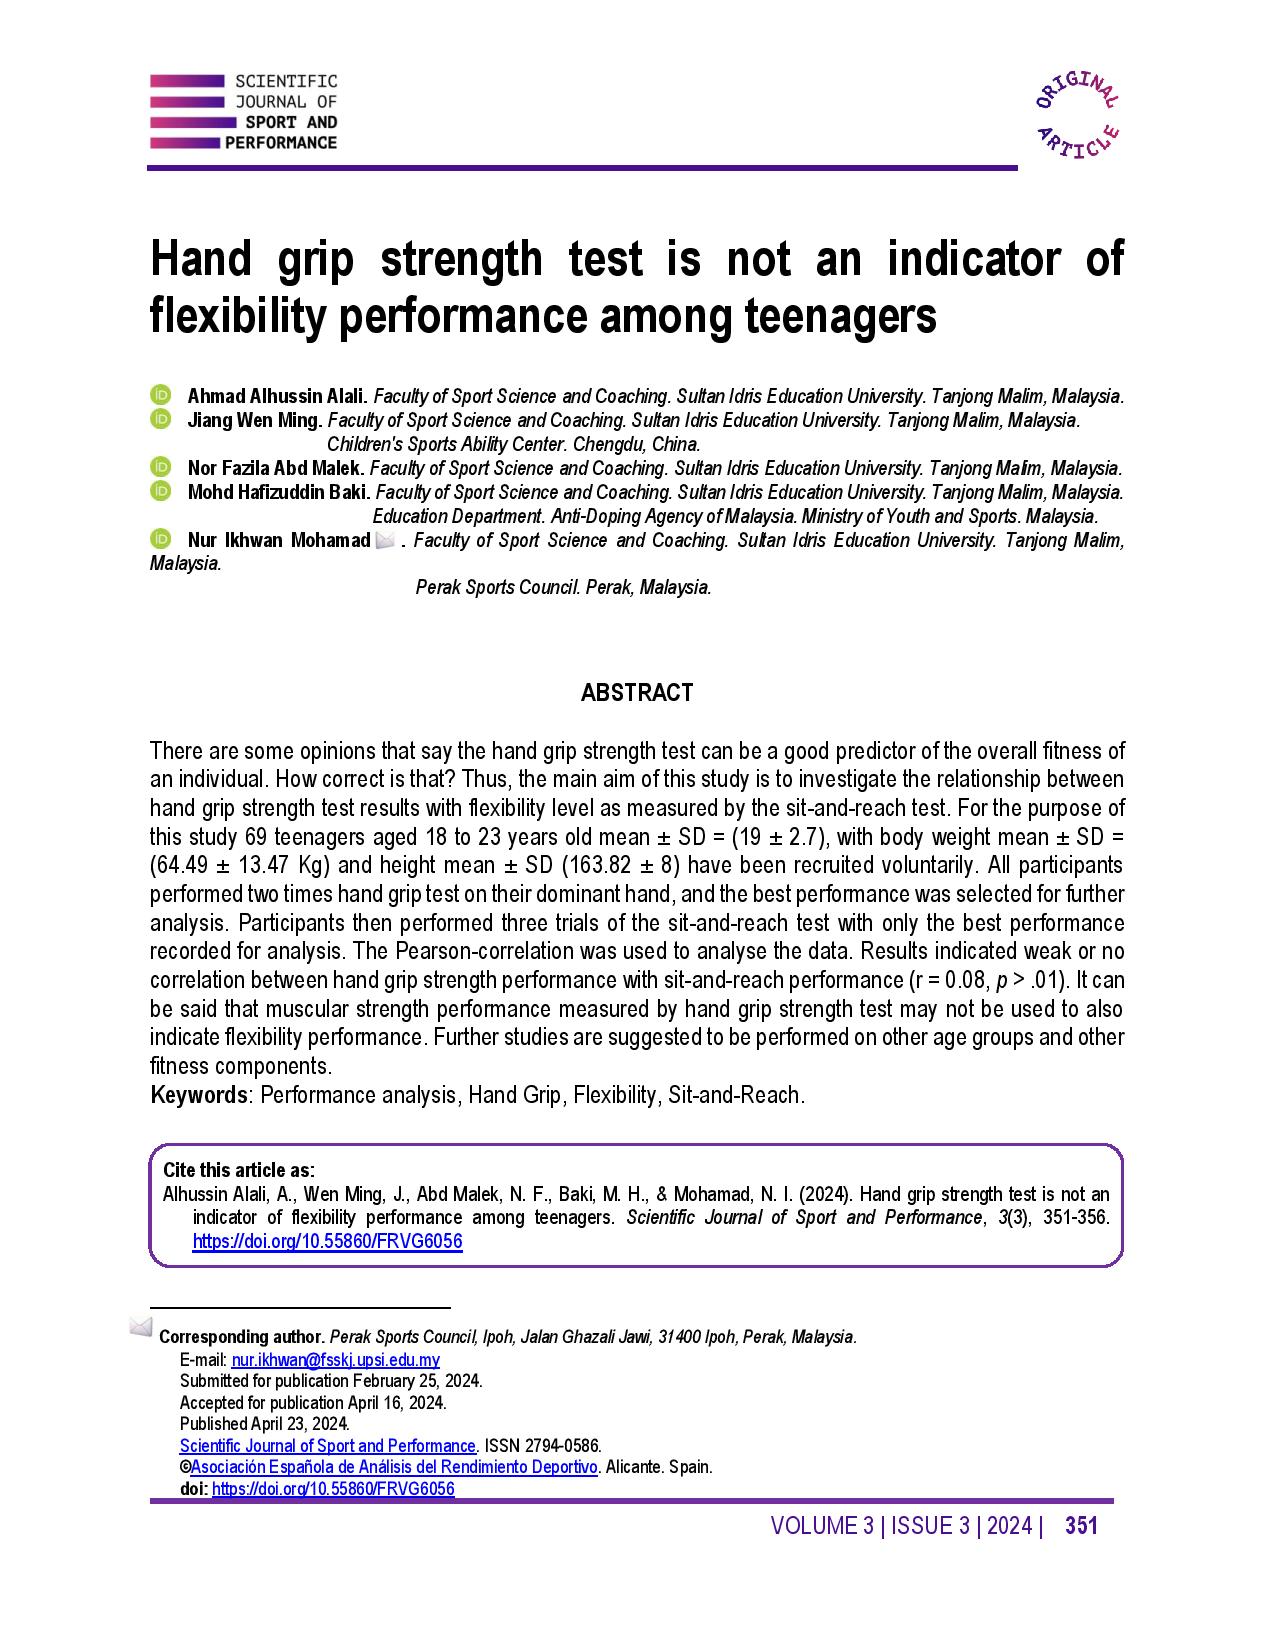 Hand grip strength test is not an indicator of flexibility performance among teenagers